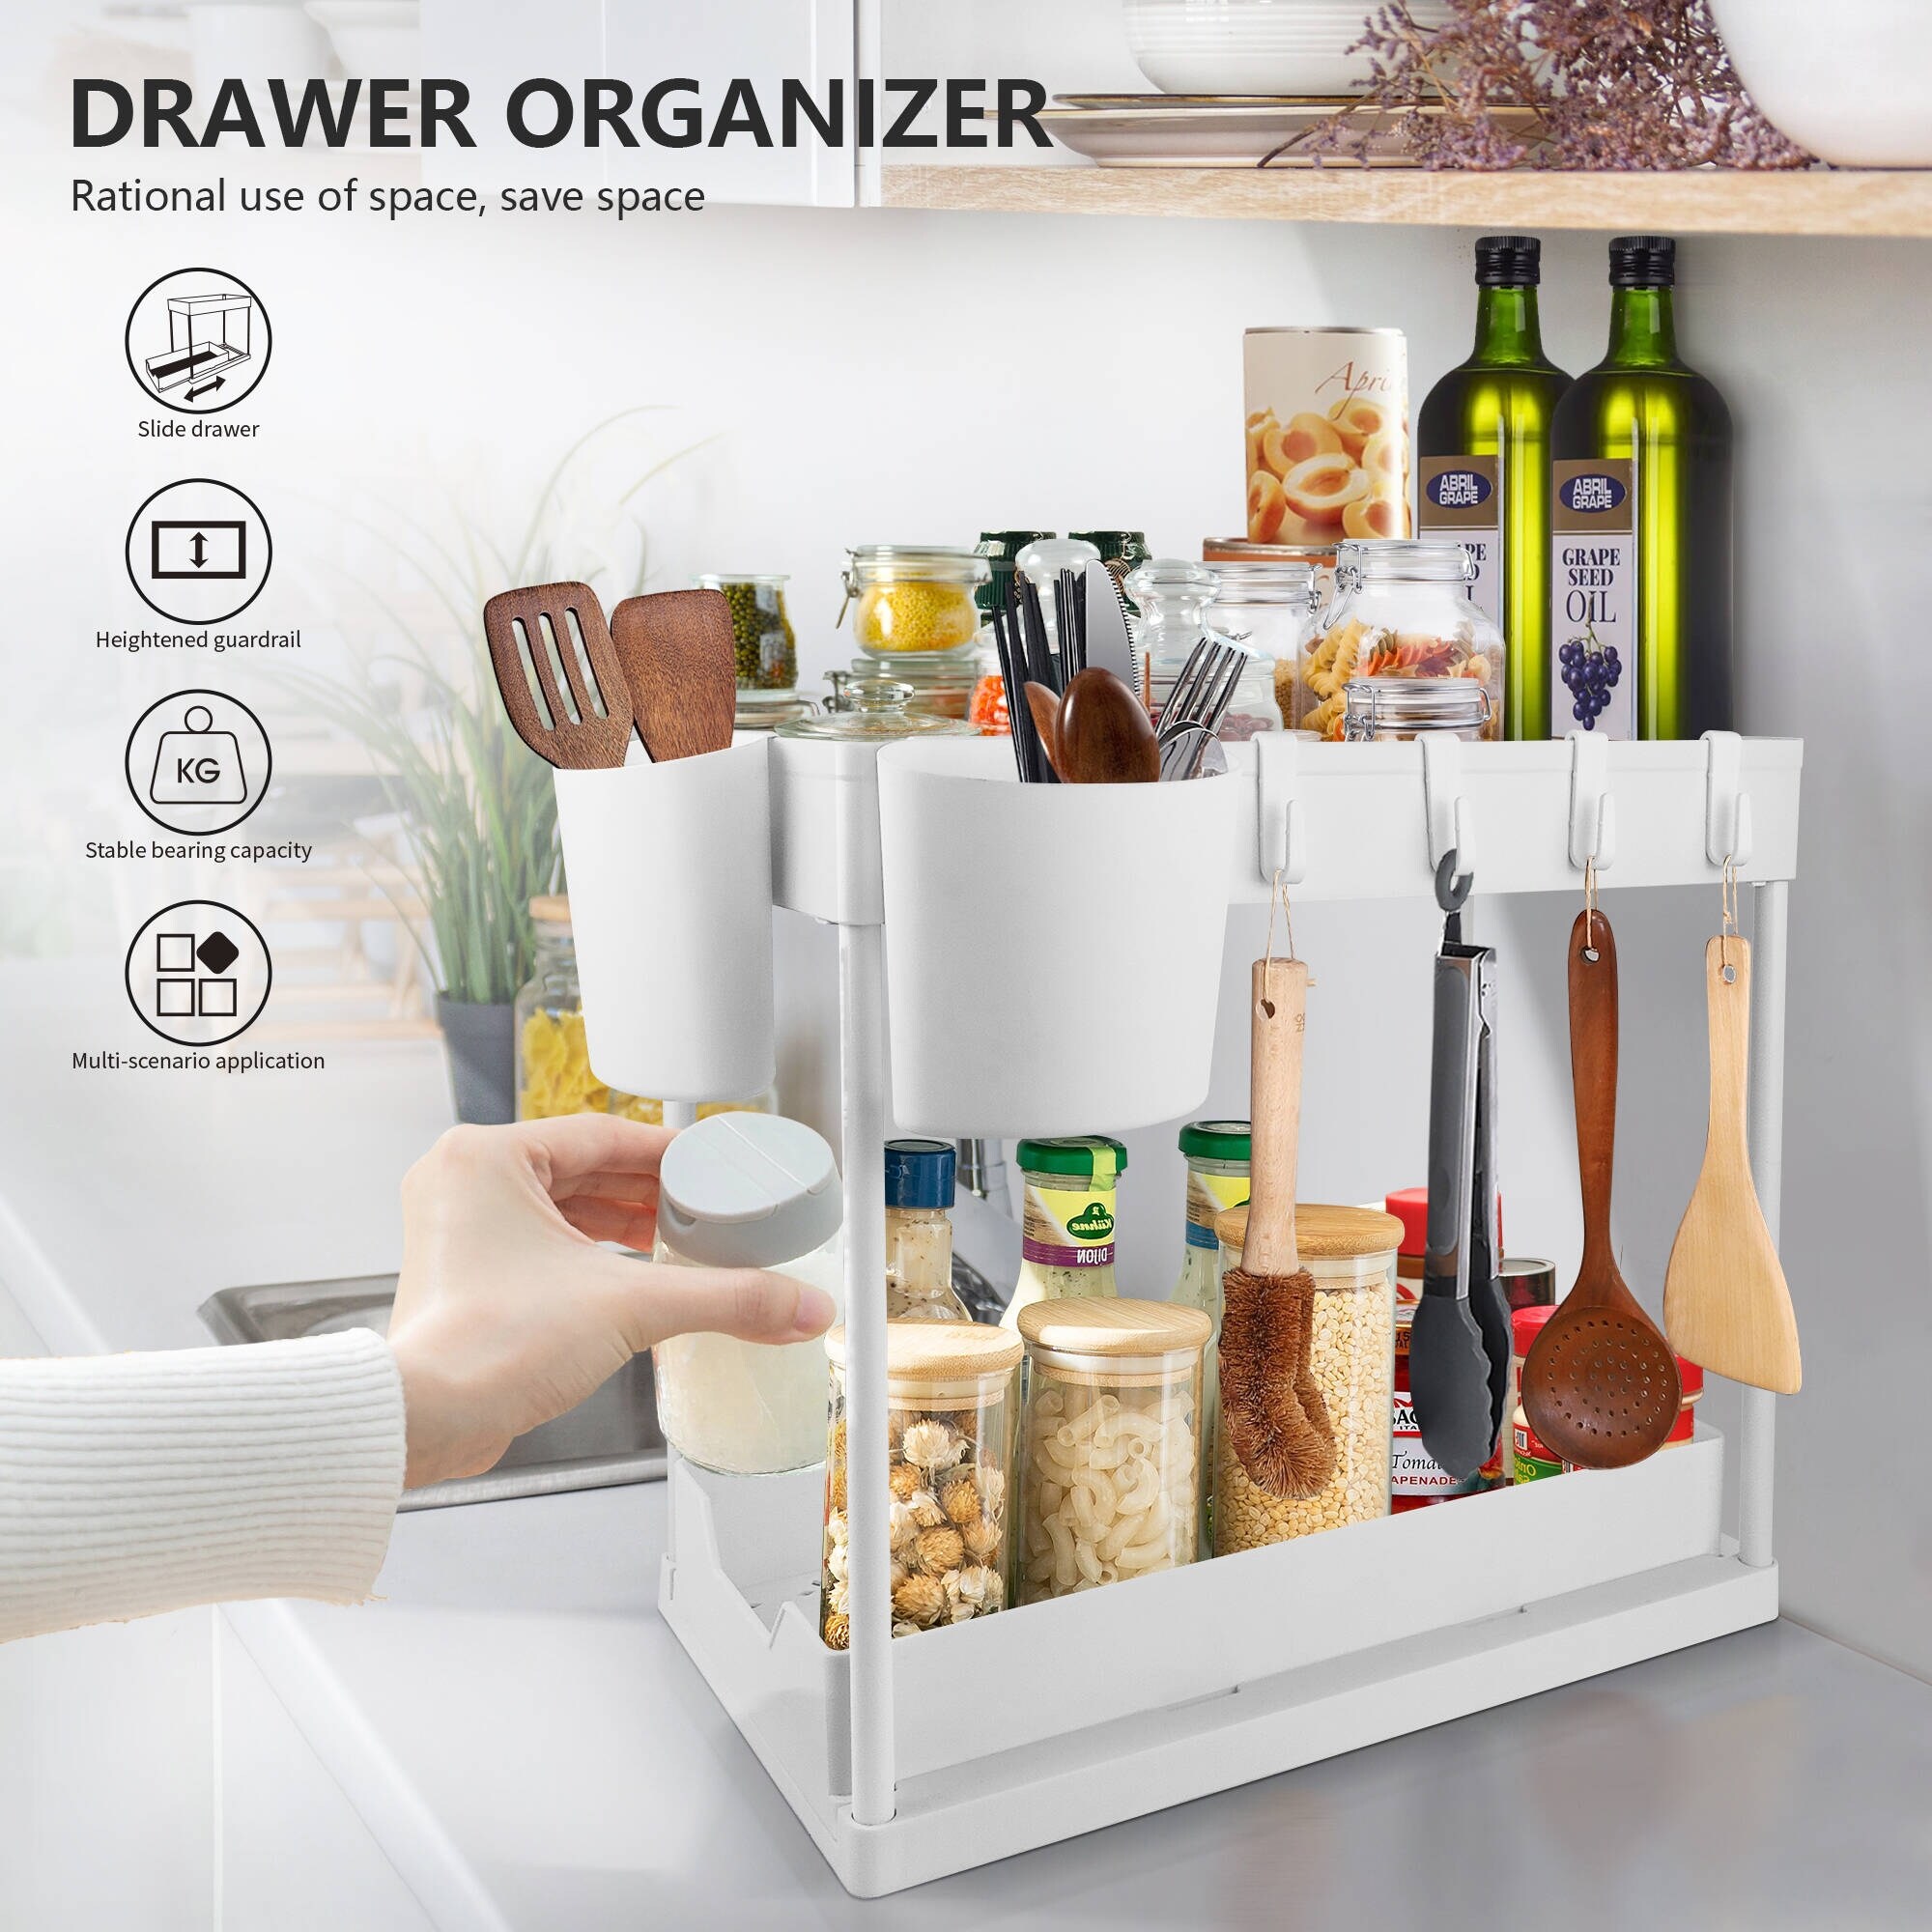 2-Tier Under Sink Organizer with Pull Out Sliding Storage Drawer (Set of 2)  - N/A - Bed Bath & Beyond - 36362933